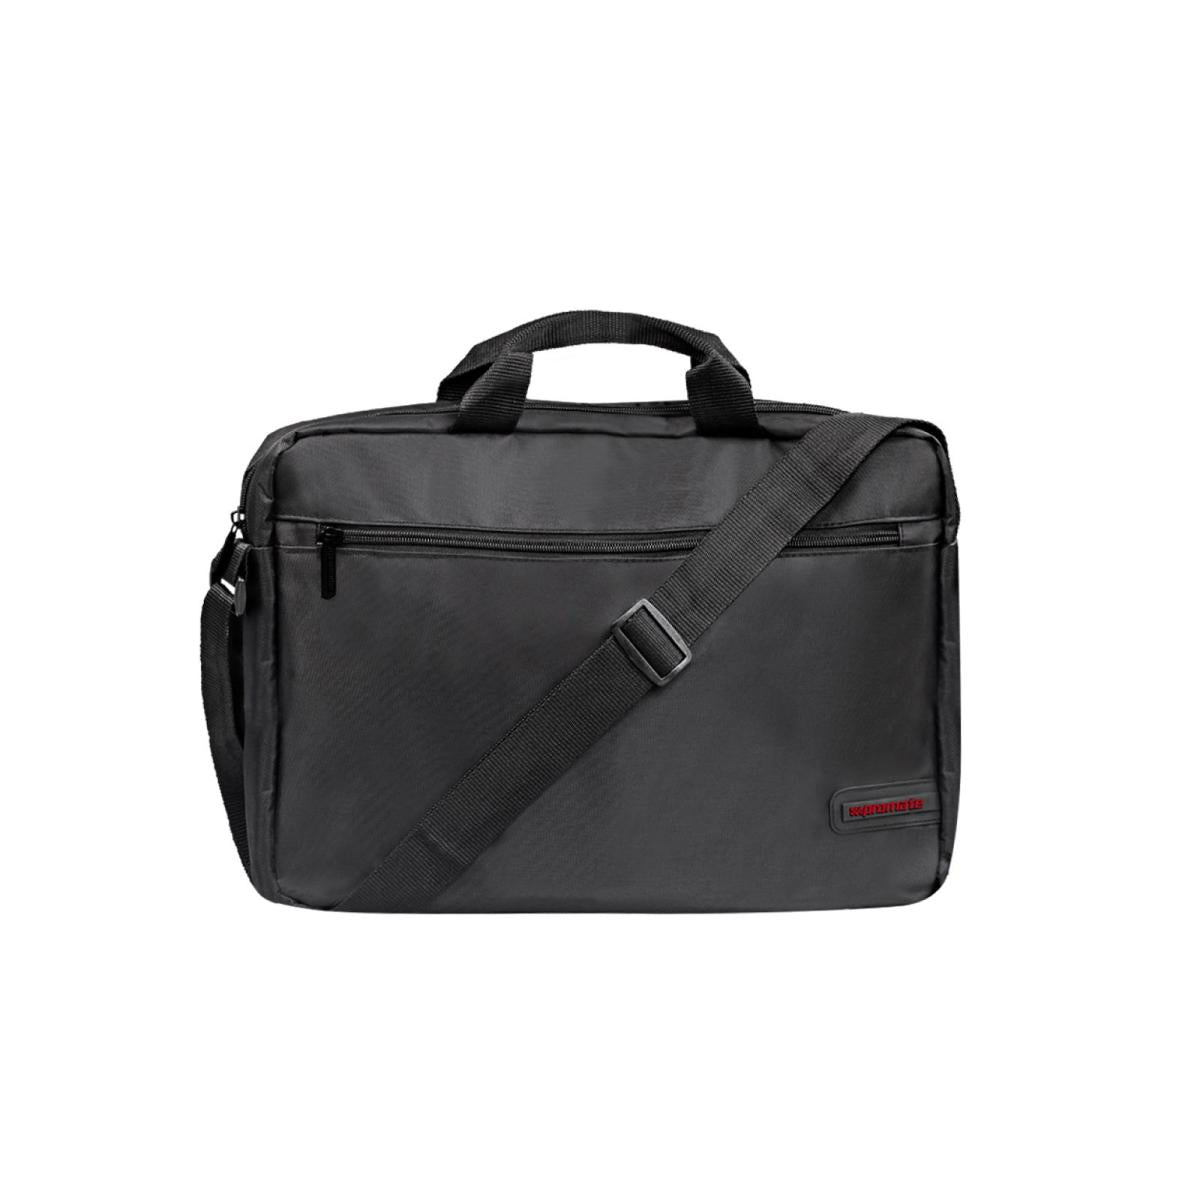 Gear-MB/PROMATE Gear-MB Lightweight Messenger Bag with Front Storage Zipper for Laptops up to 15.6” case / Black / N/A